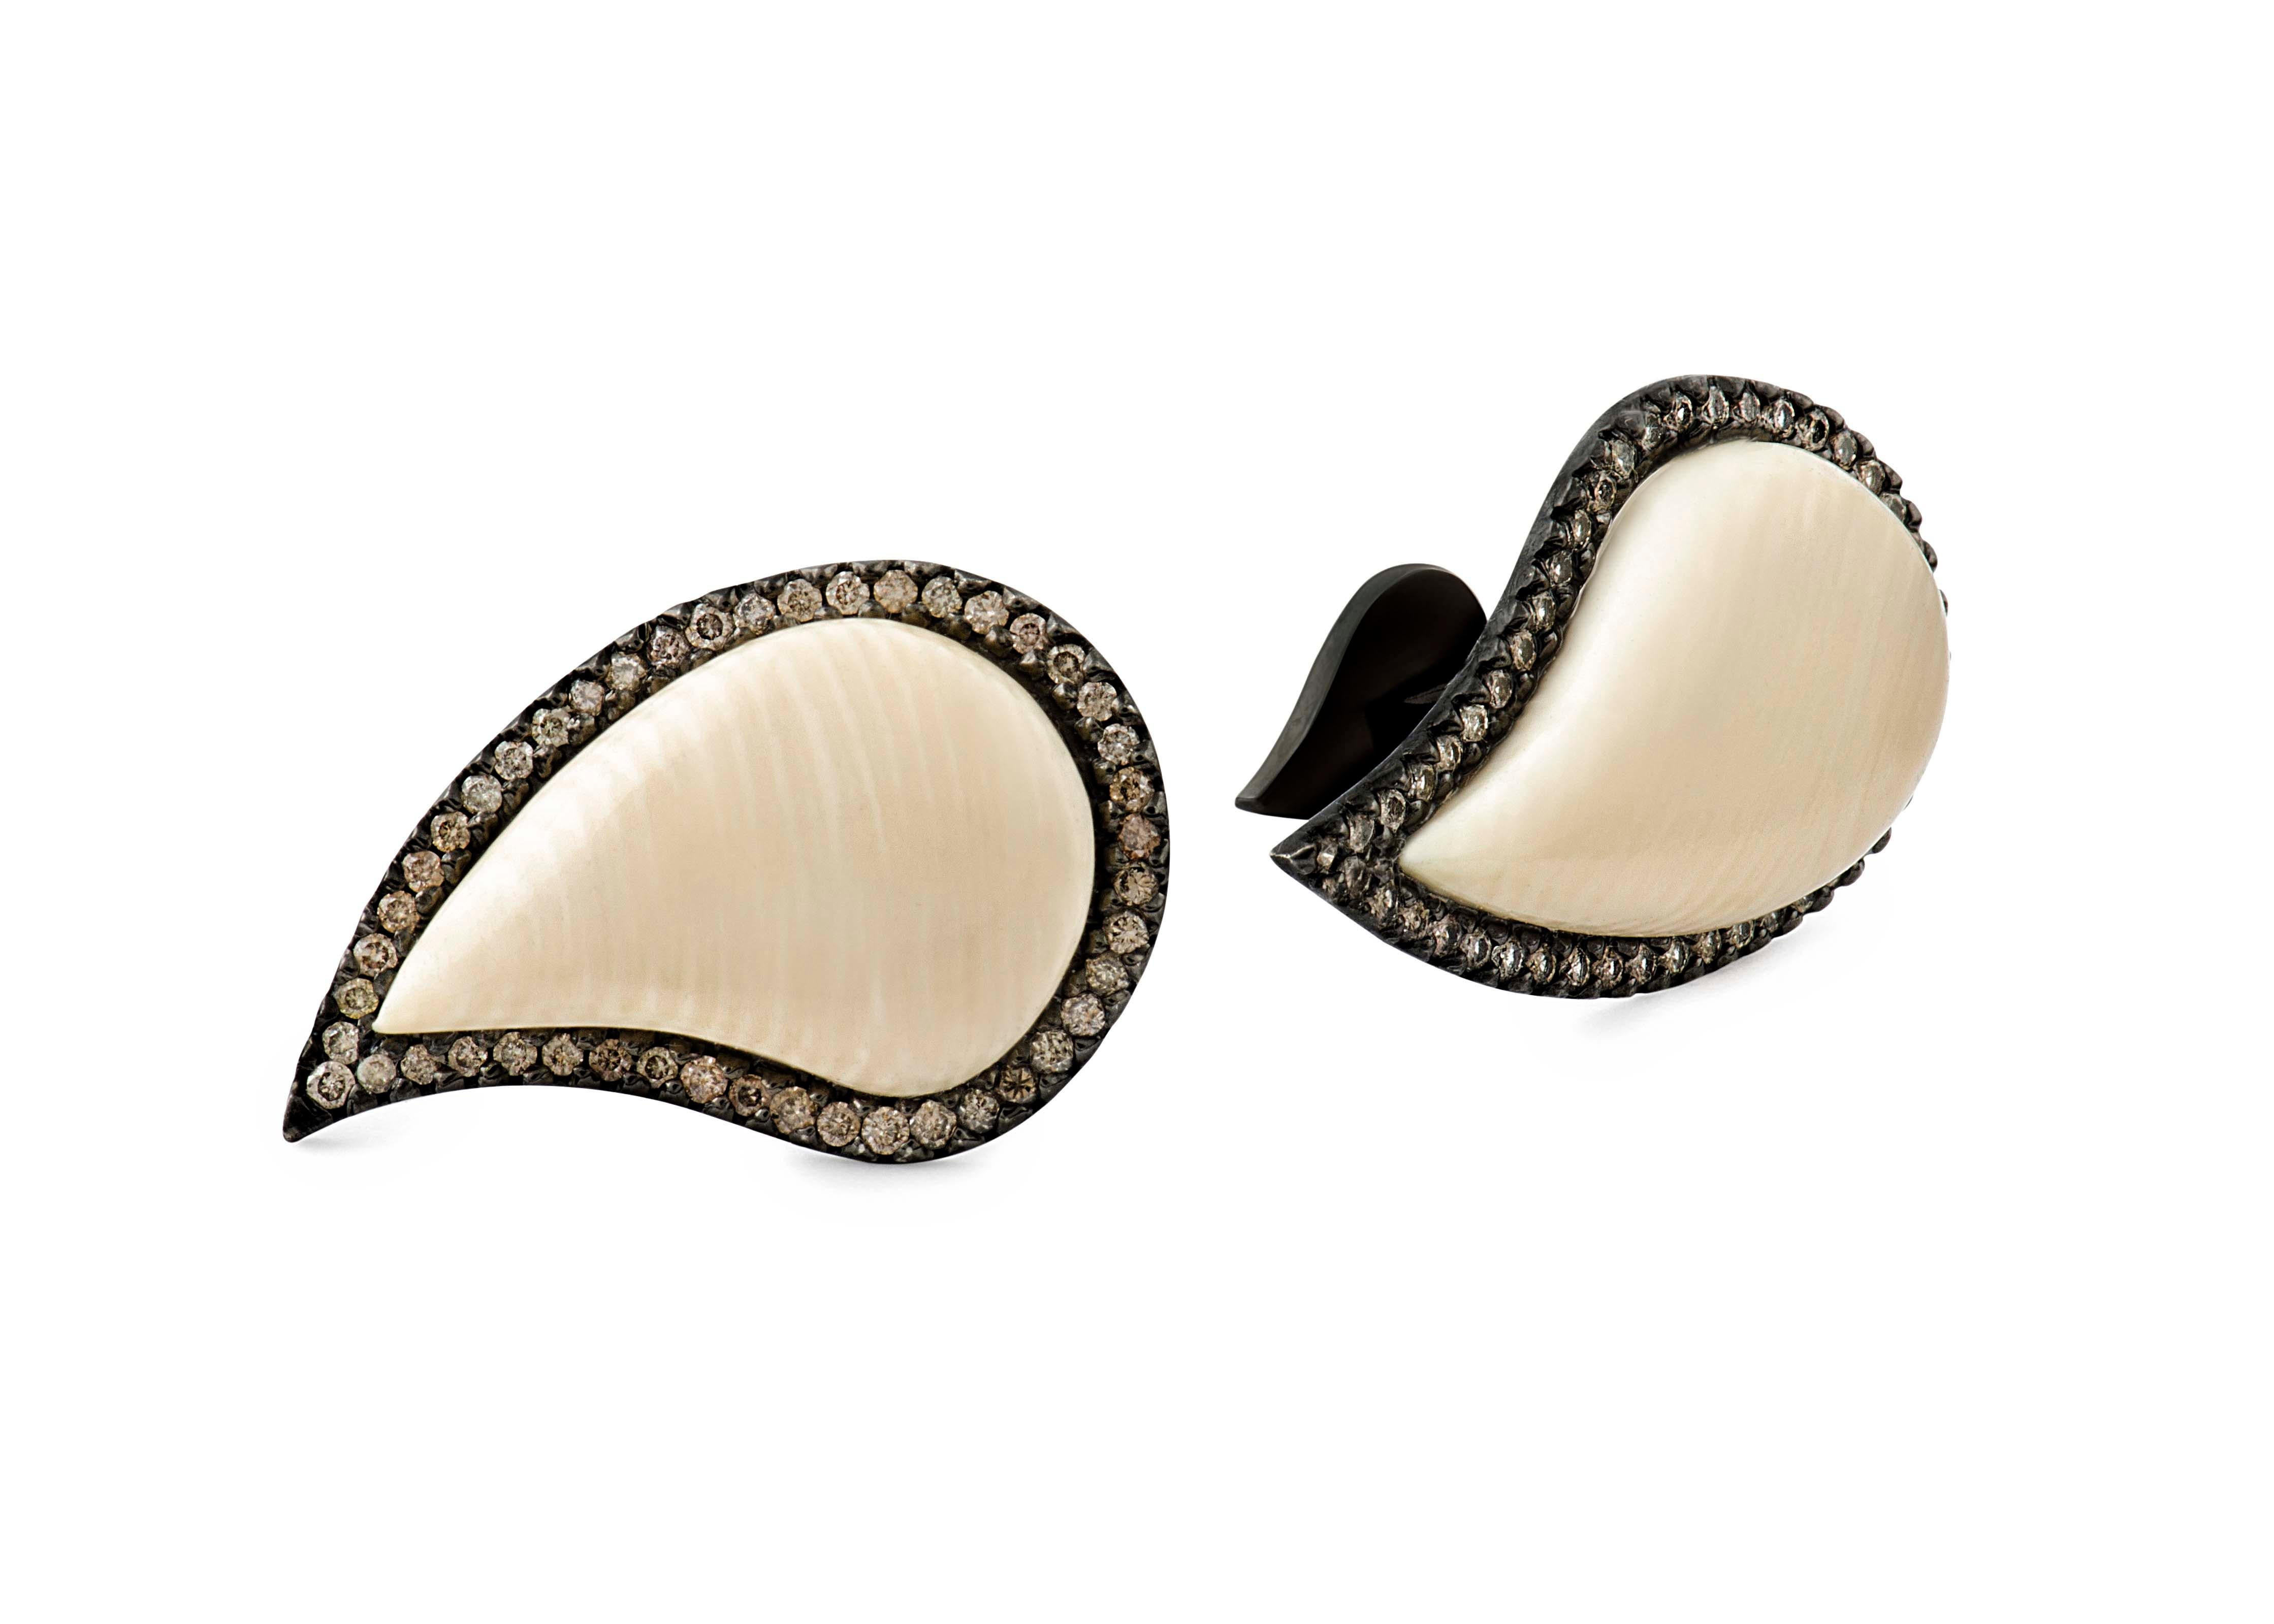 These one-of-a-kind Ishq Cufflinks use prehistoric mammoth ivory from Alaska wrapped in sterling silver and lined with cognac diamonds to capture the timeless beauty of paisley's organic form. The intricate 